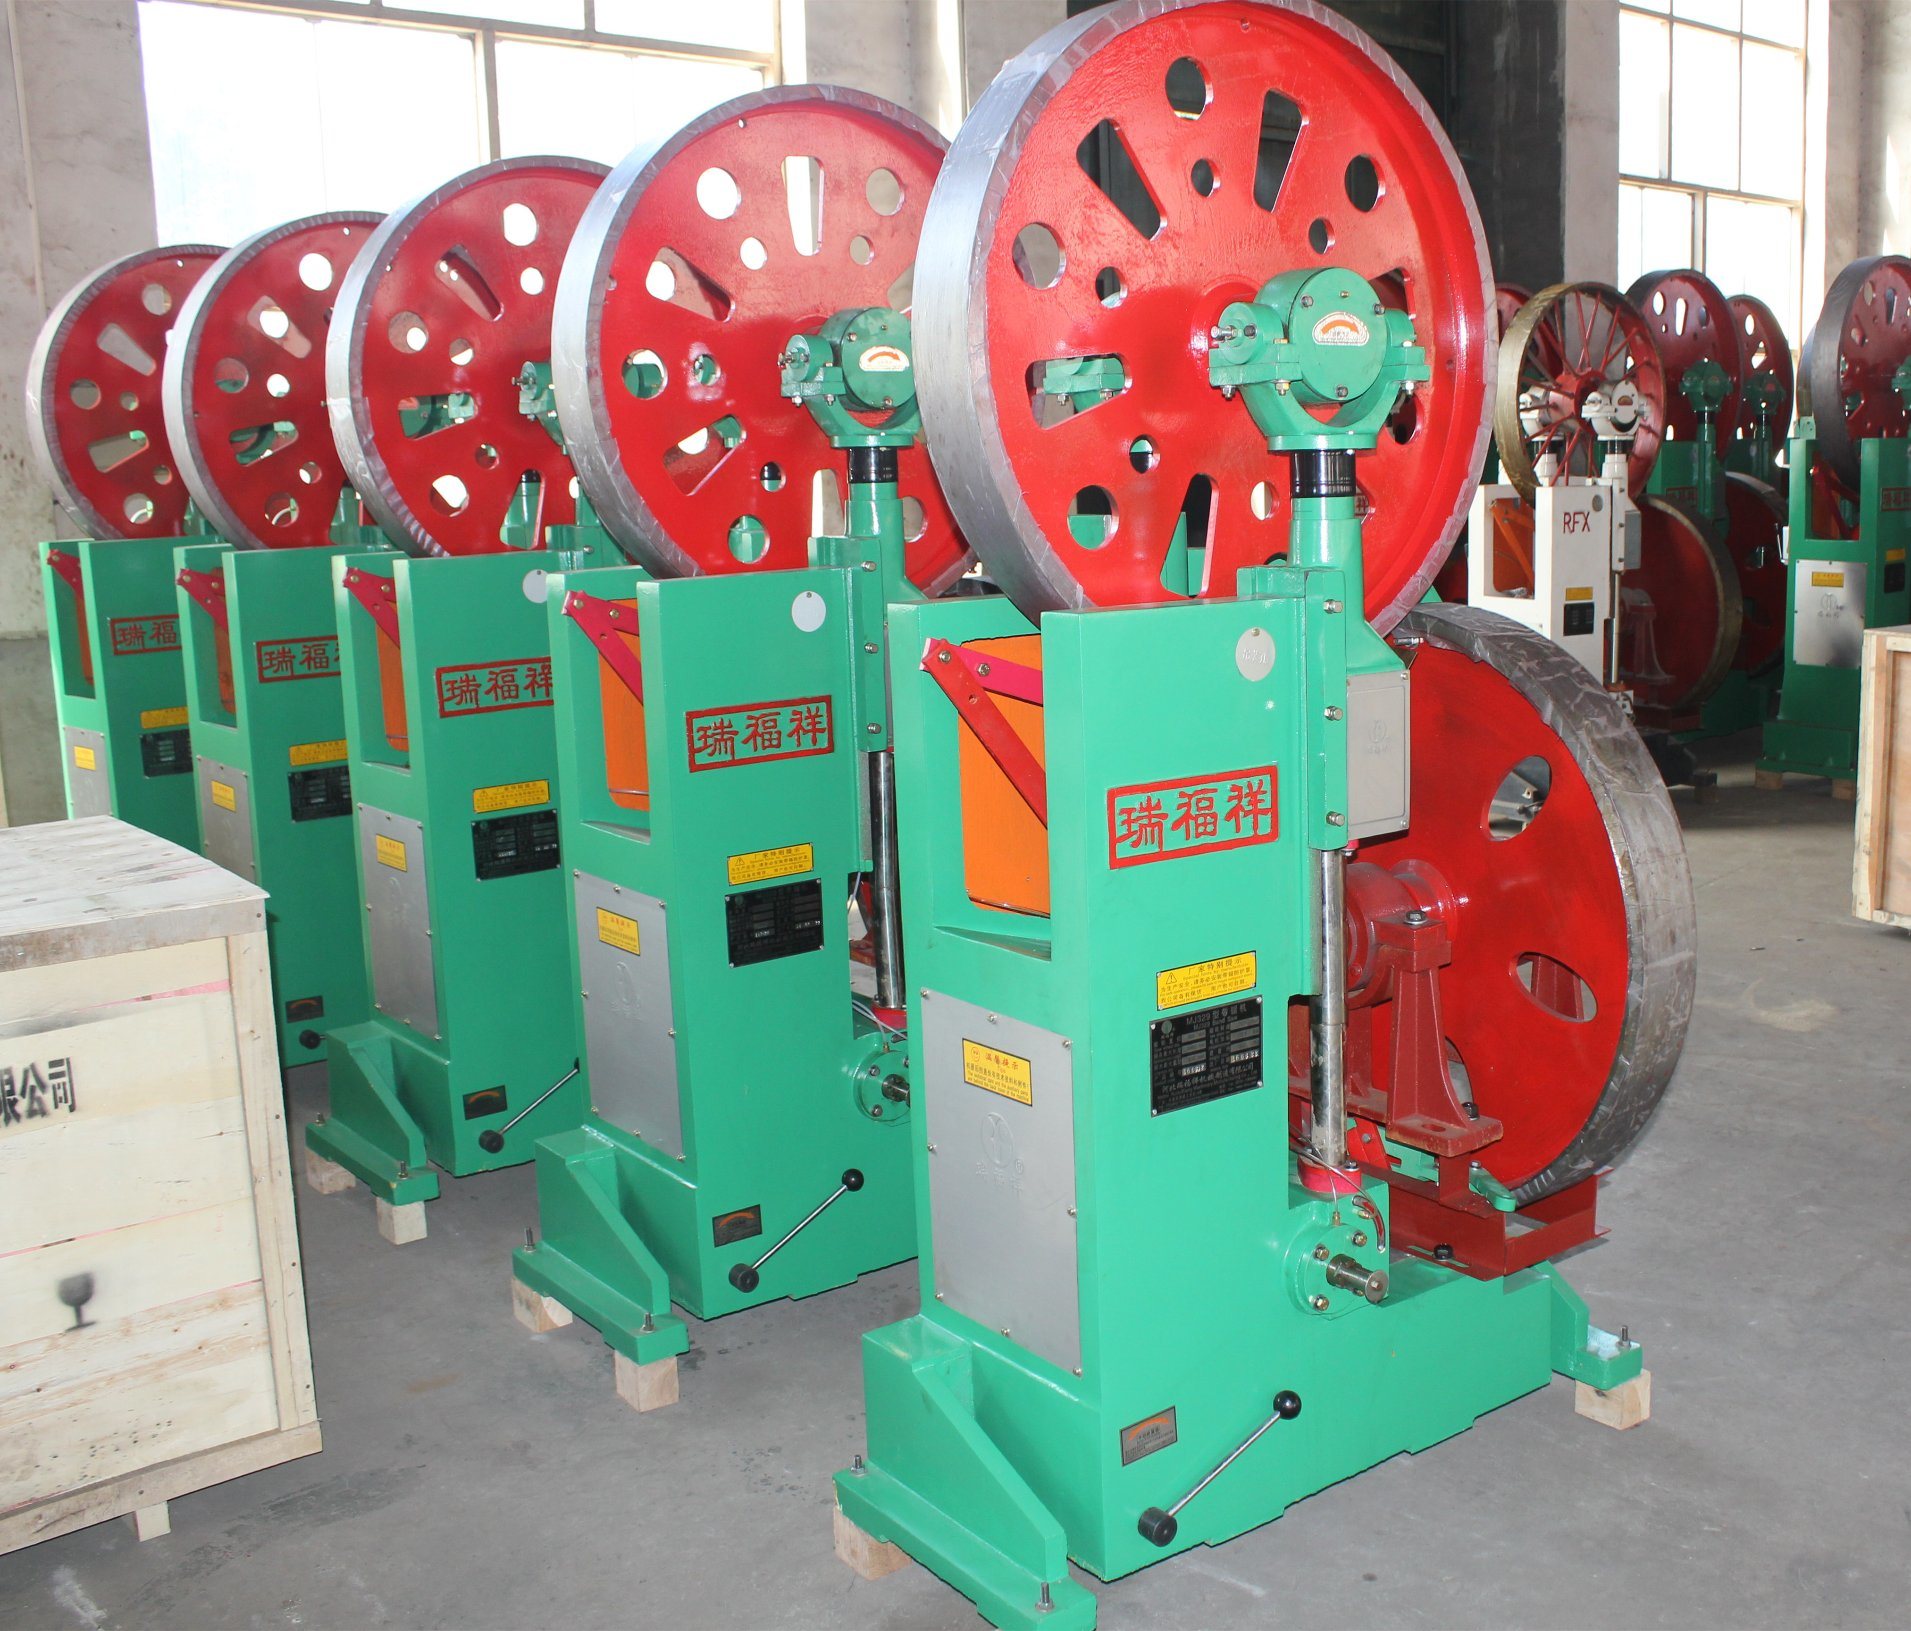 Wood Saws for Cutting Trees Hot Selling Directly From China Factory